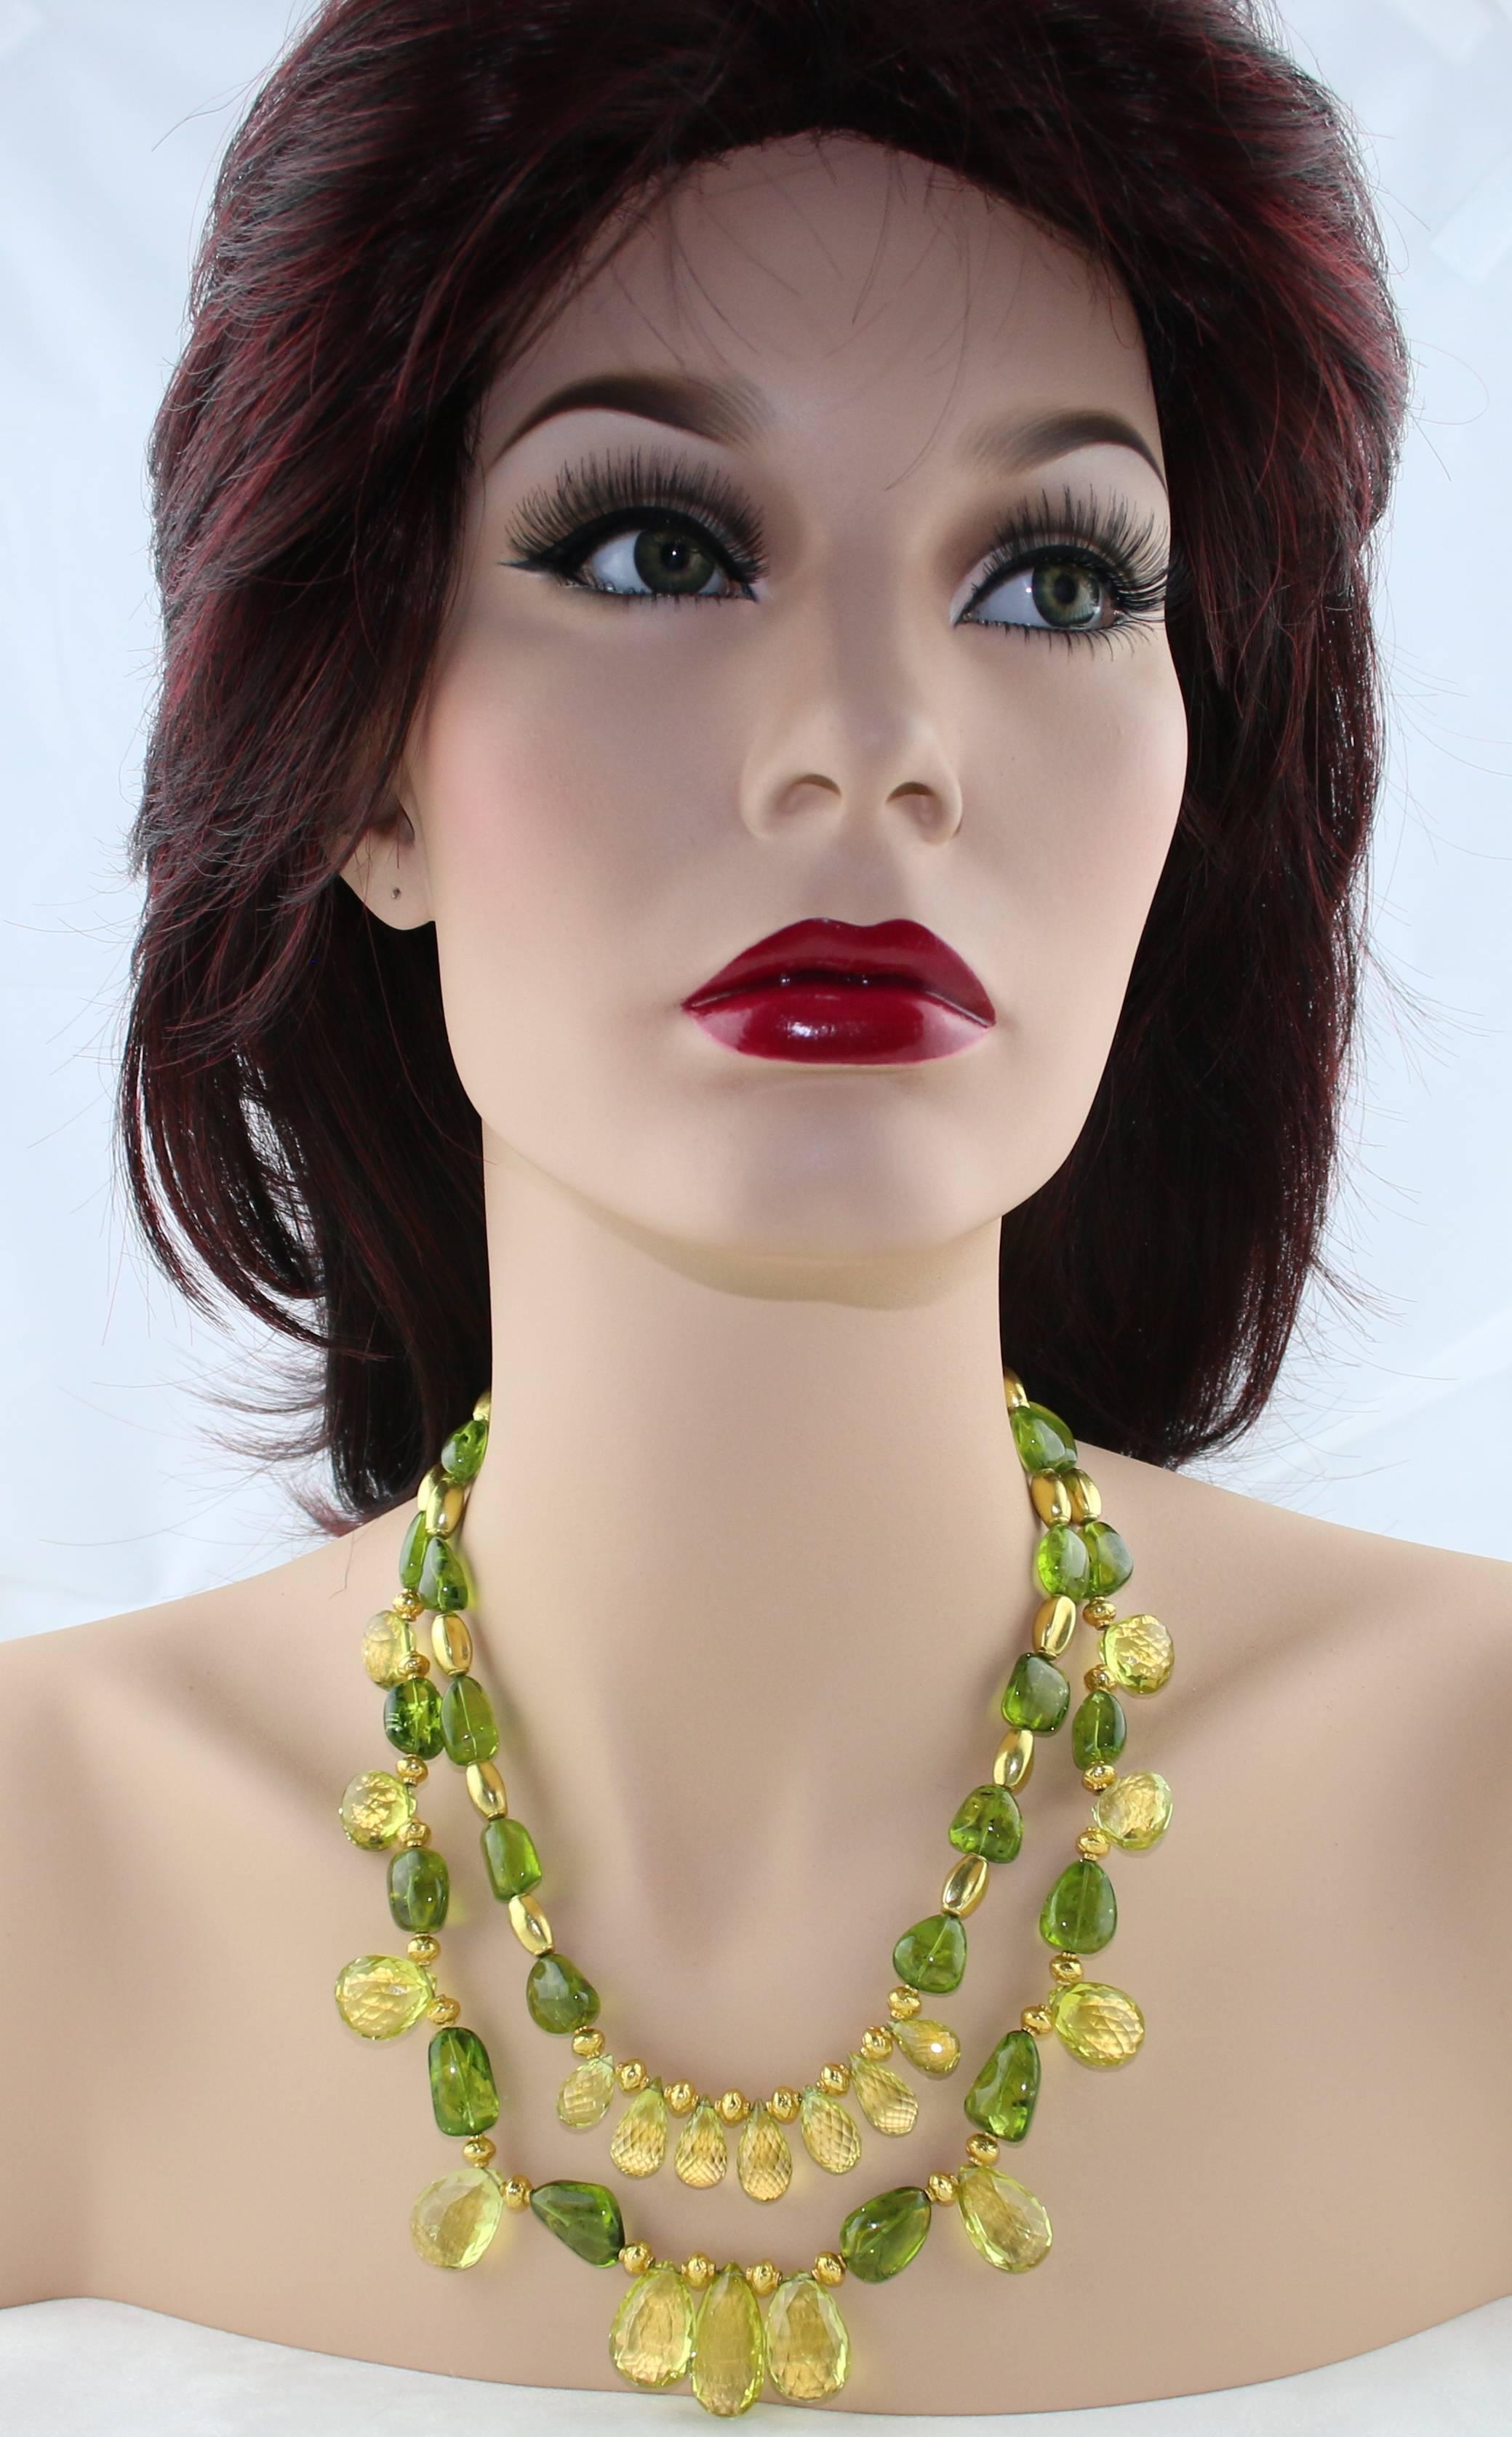 Very Regal Two Strand Necklace
The necklace is 18K Yellow Gold
There are 650.00 Carats in Lime Citrine And Peridot
The necklace measures 17.5